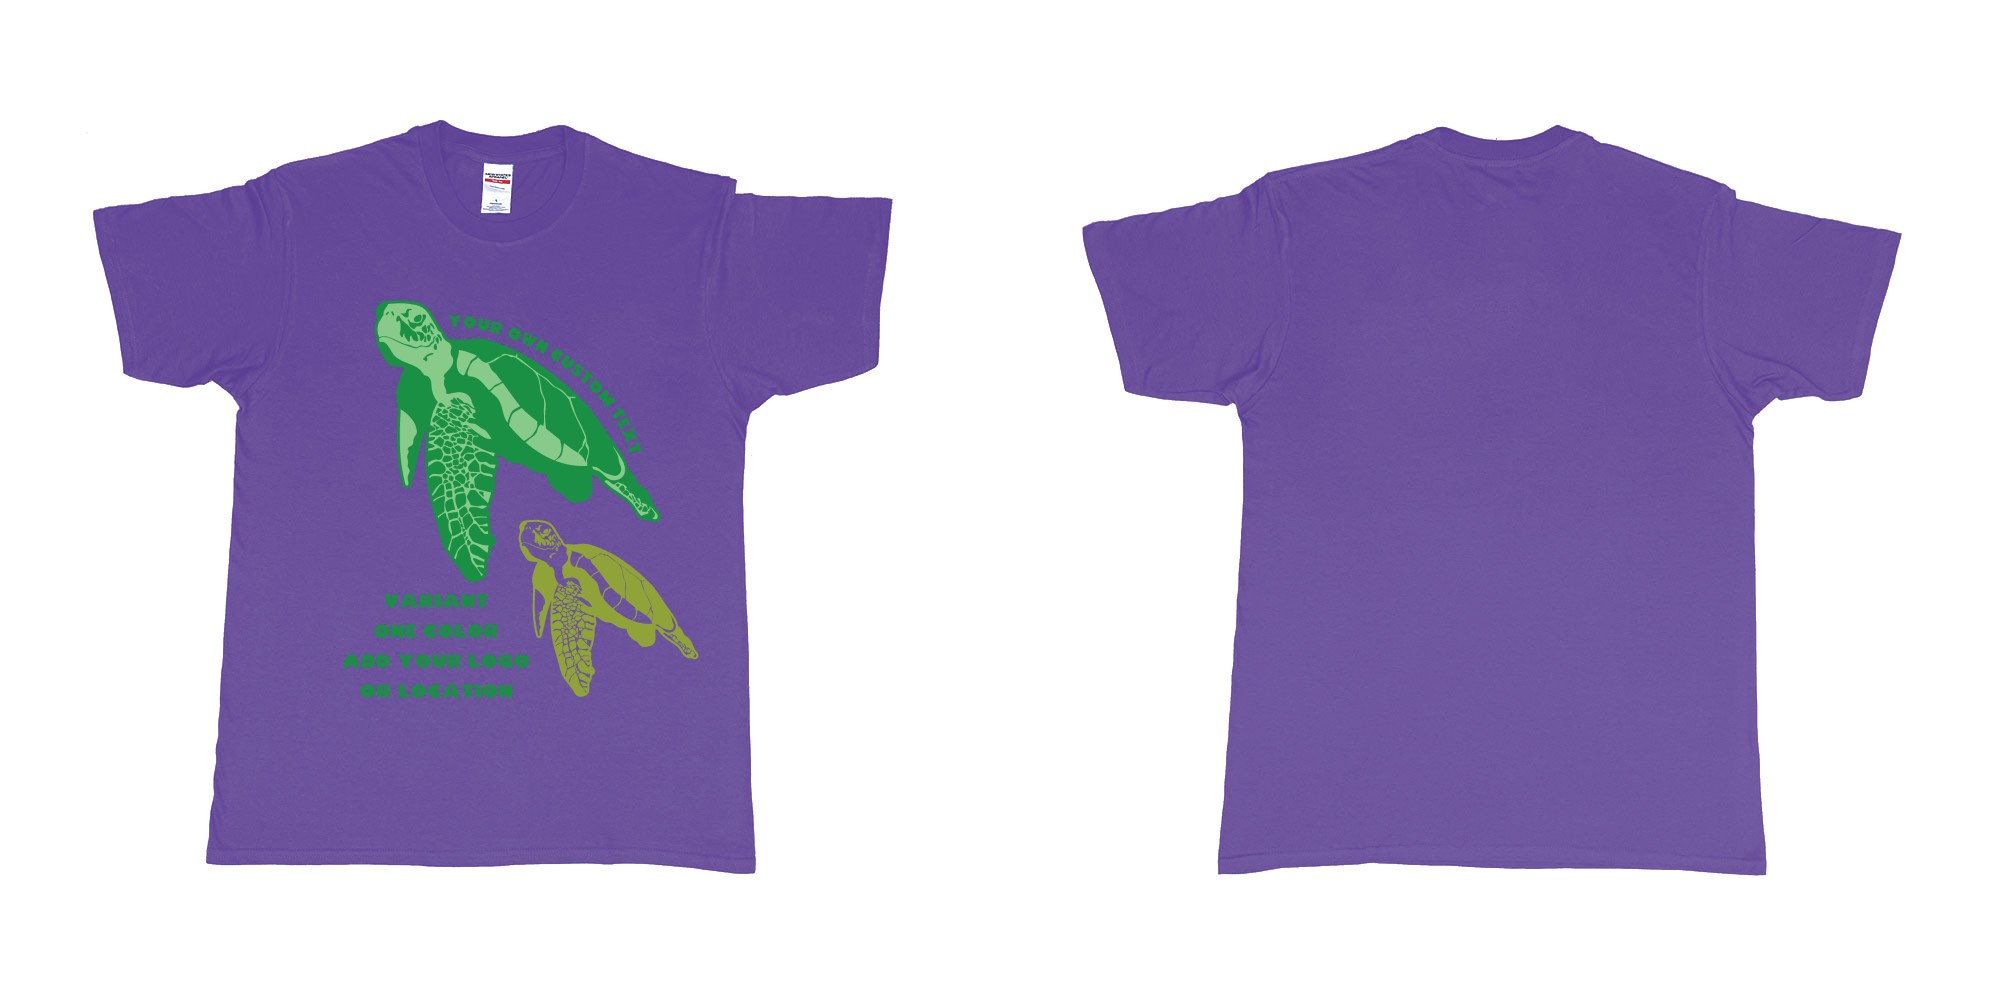 Custom tshirt design hawksbill green sea turtle chilling add logo in fabric color purple choice your own text made in Bali by The Pirate Way